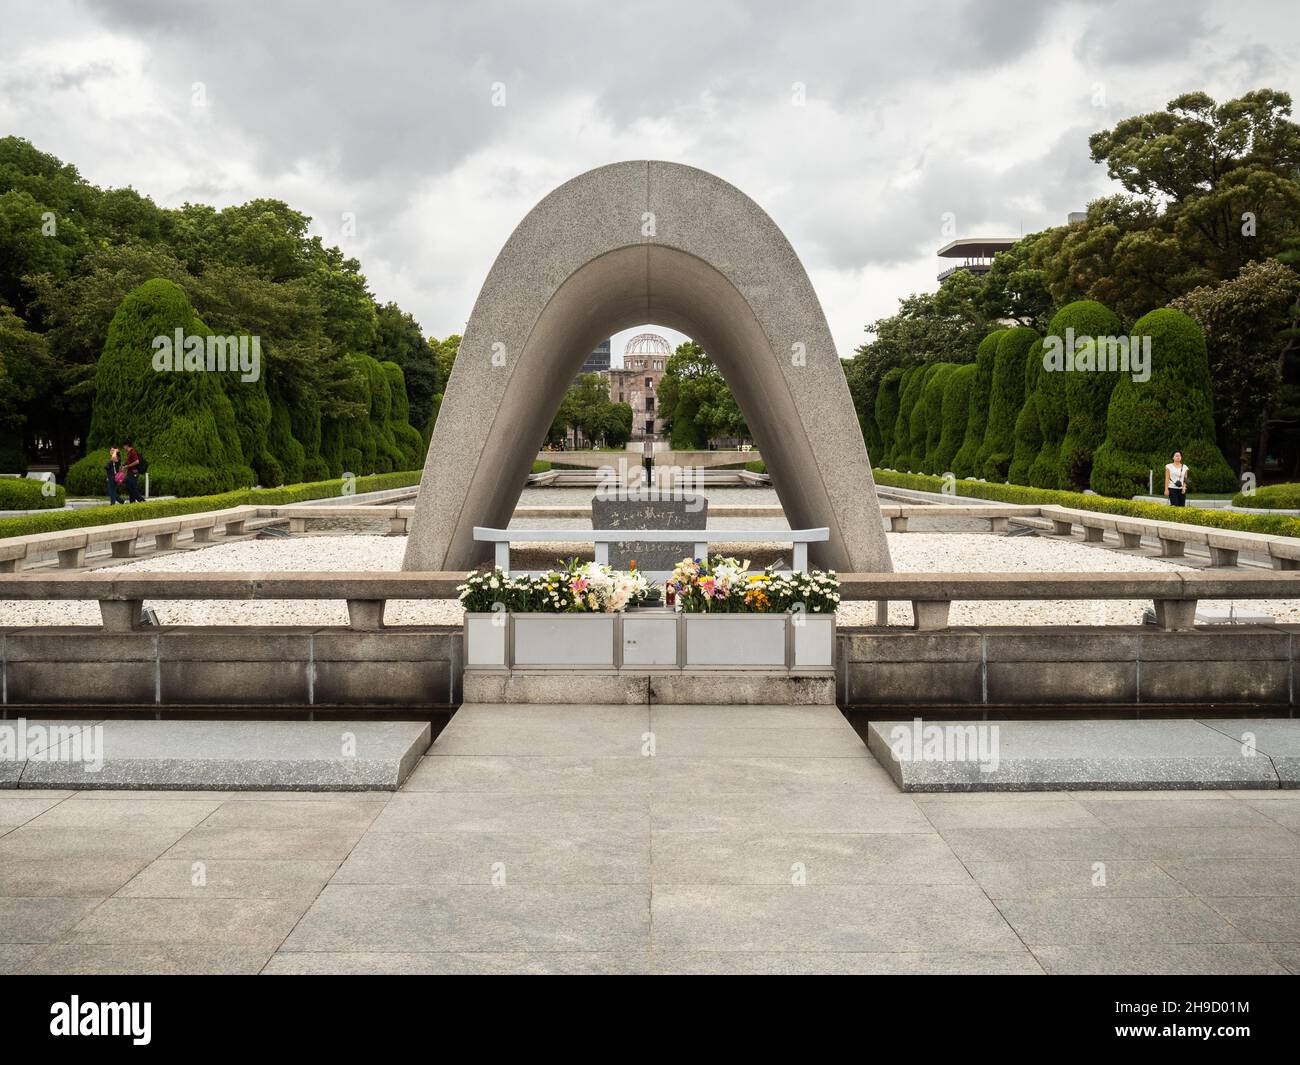 The Memorial Cenotaph to victims of the atomic bomb, Hiroshima, Japan. The Cenotaph bears the names of those who died in the bombing on 6 August 1945, Stock Photo